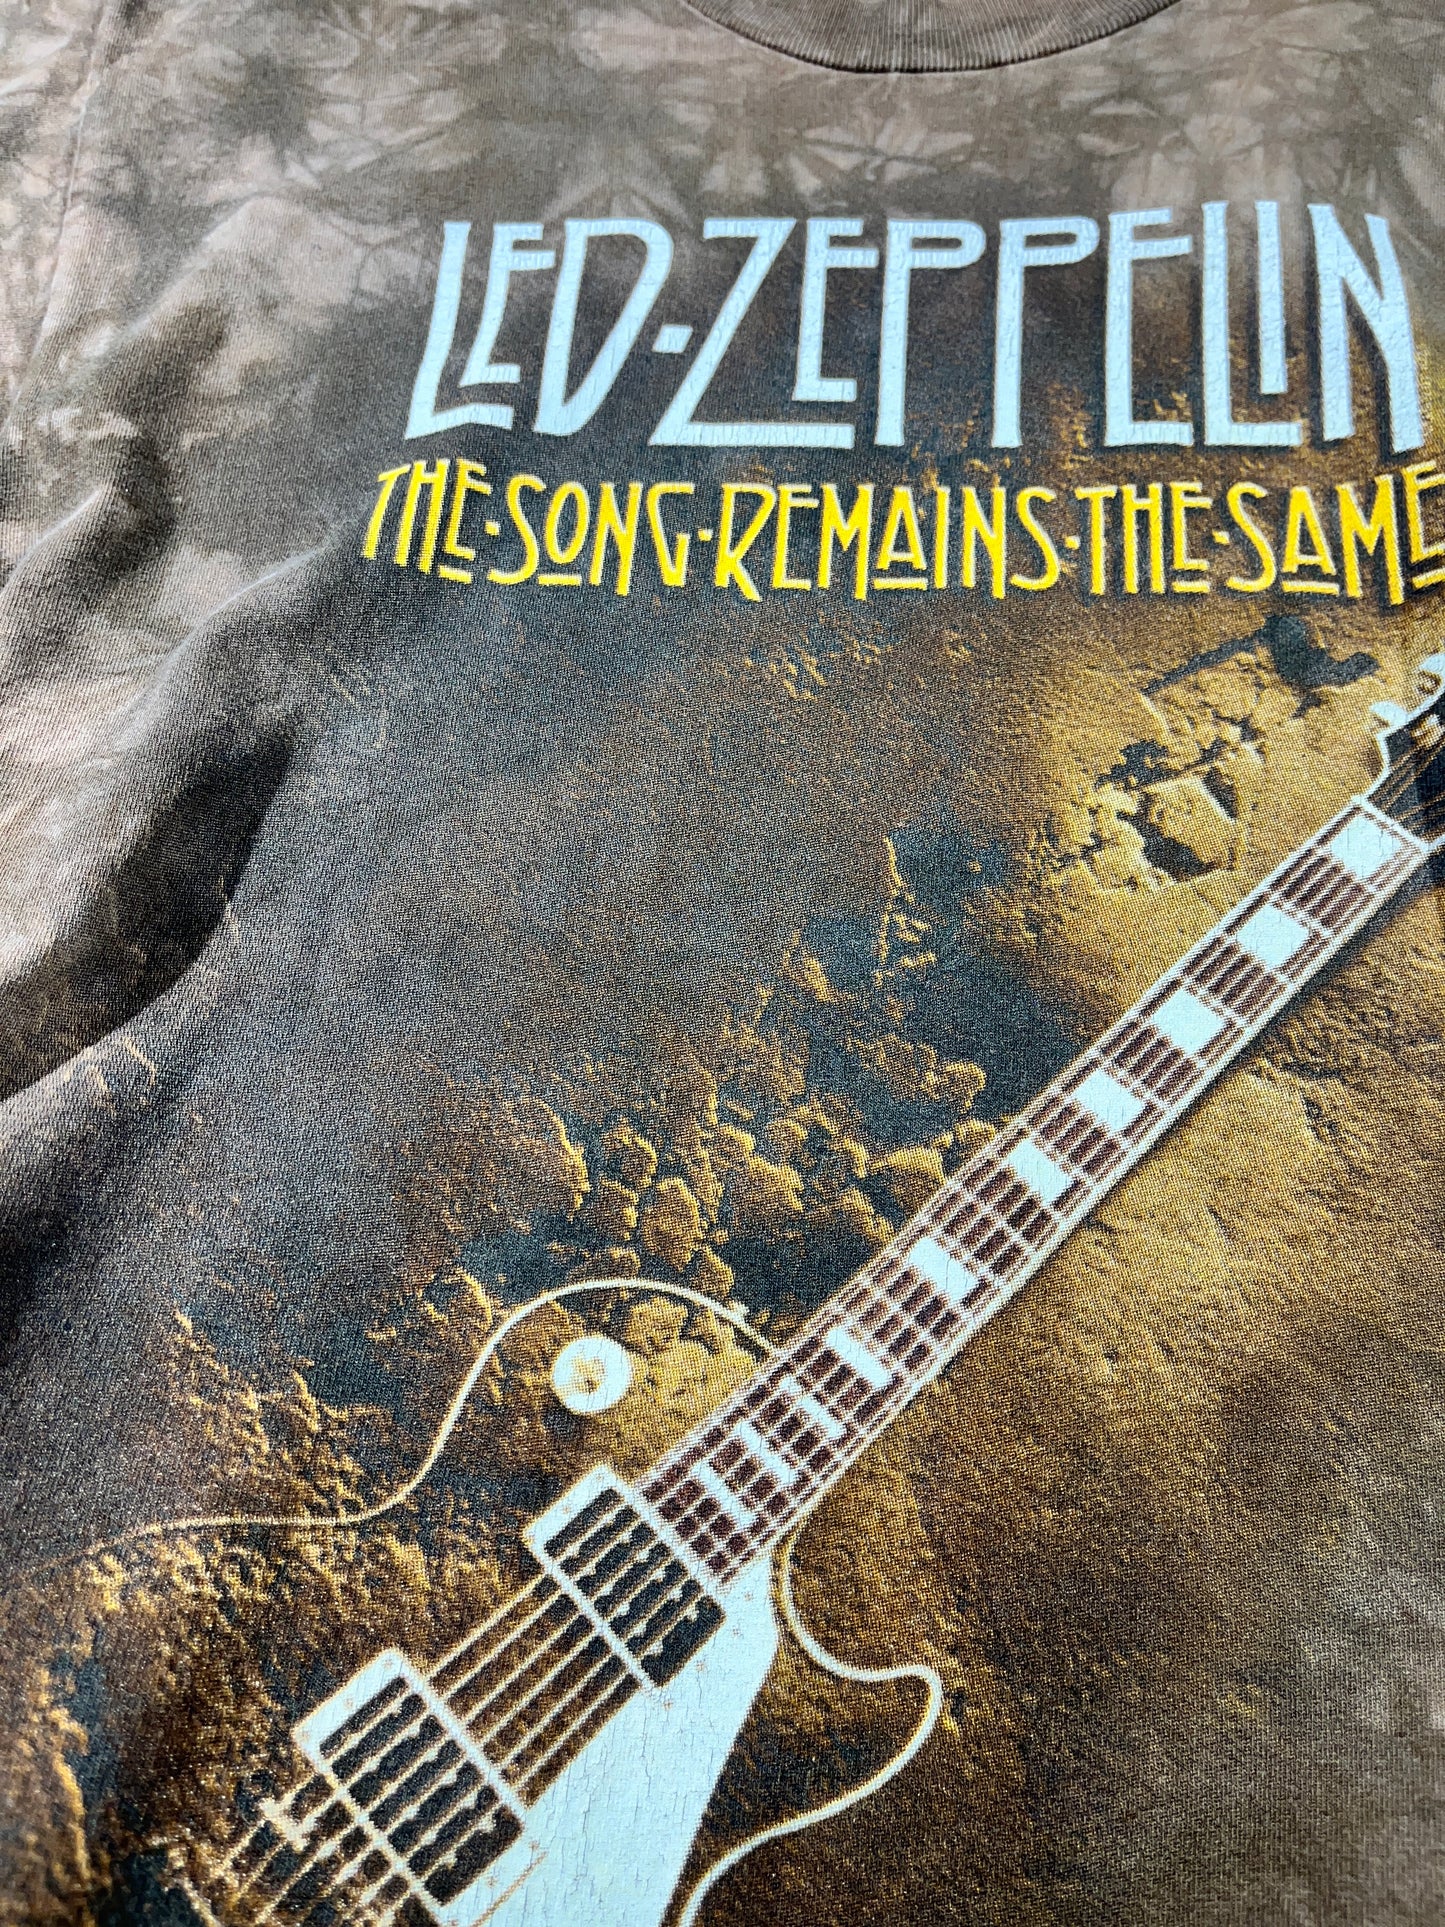 Vintage Led Zeppelin T-Shirt The Song Remains The Same 90's Single Stitch